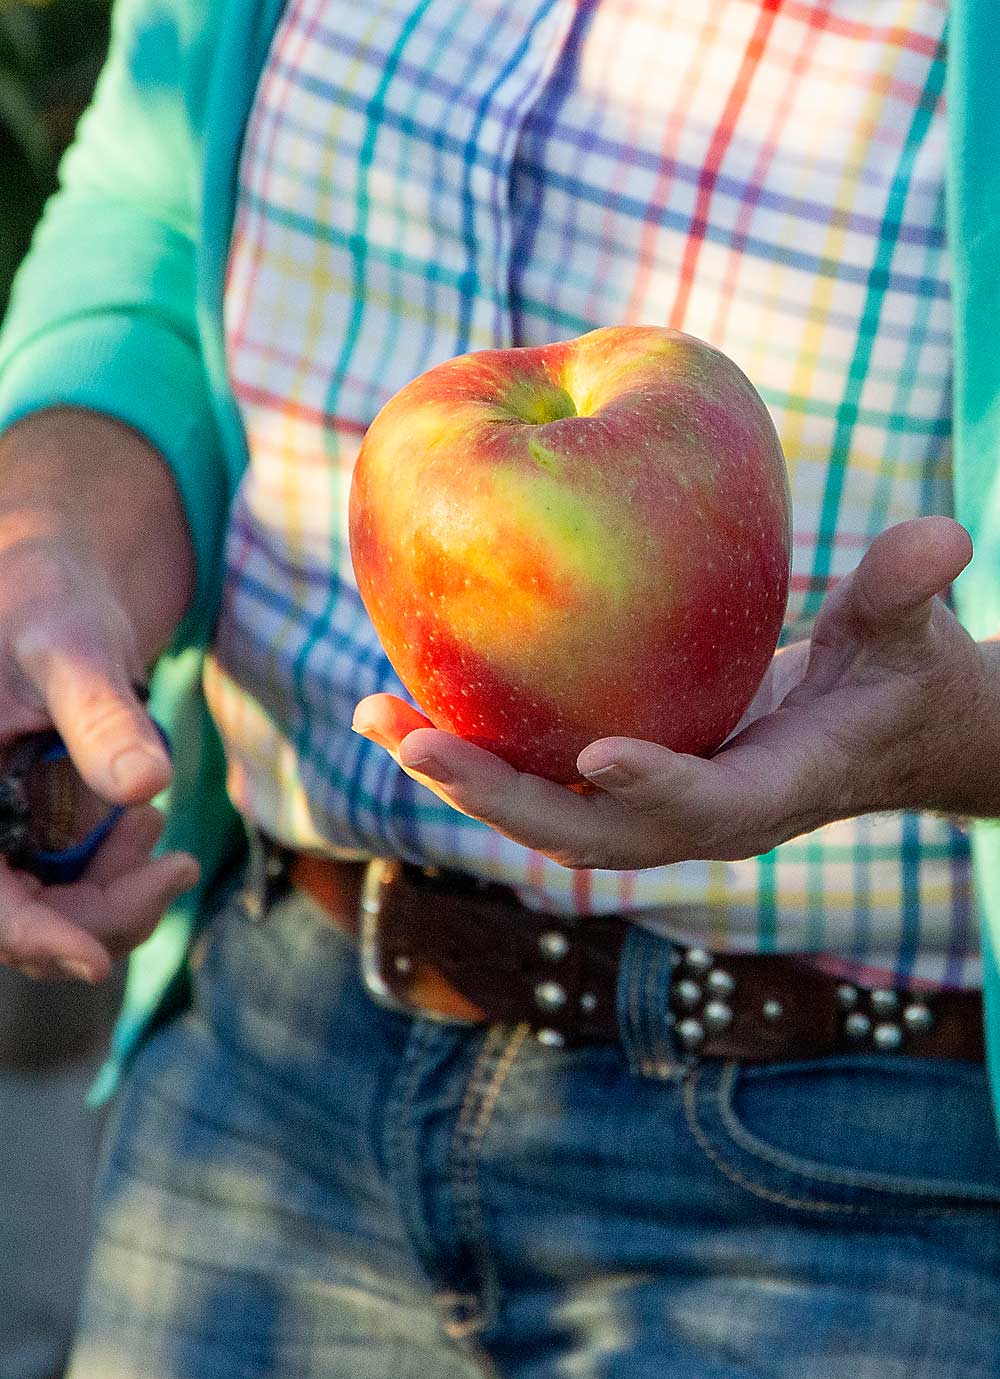 Jill Werner holds a SugarBee that grew a little bit too big for the packing line. (Ross Courtney/Good Fruit Grower)